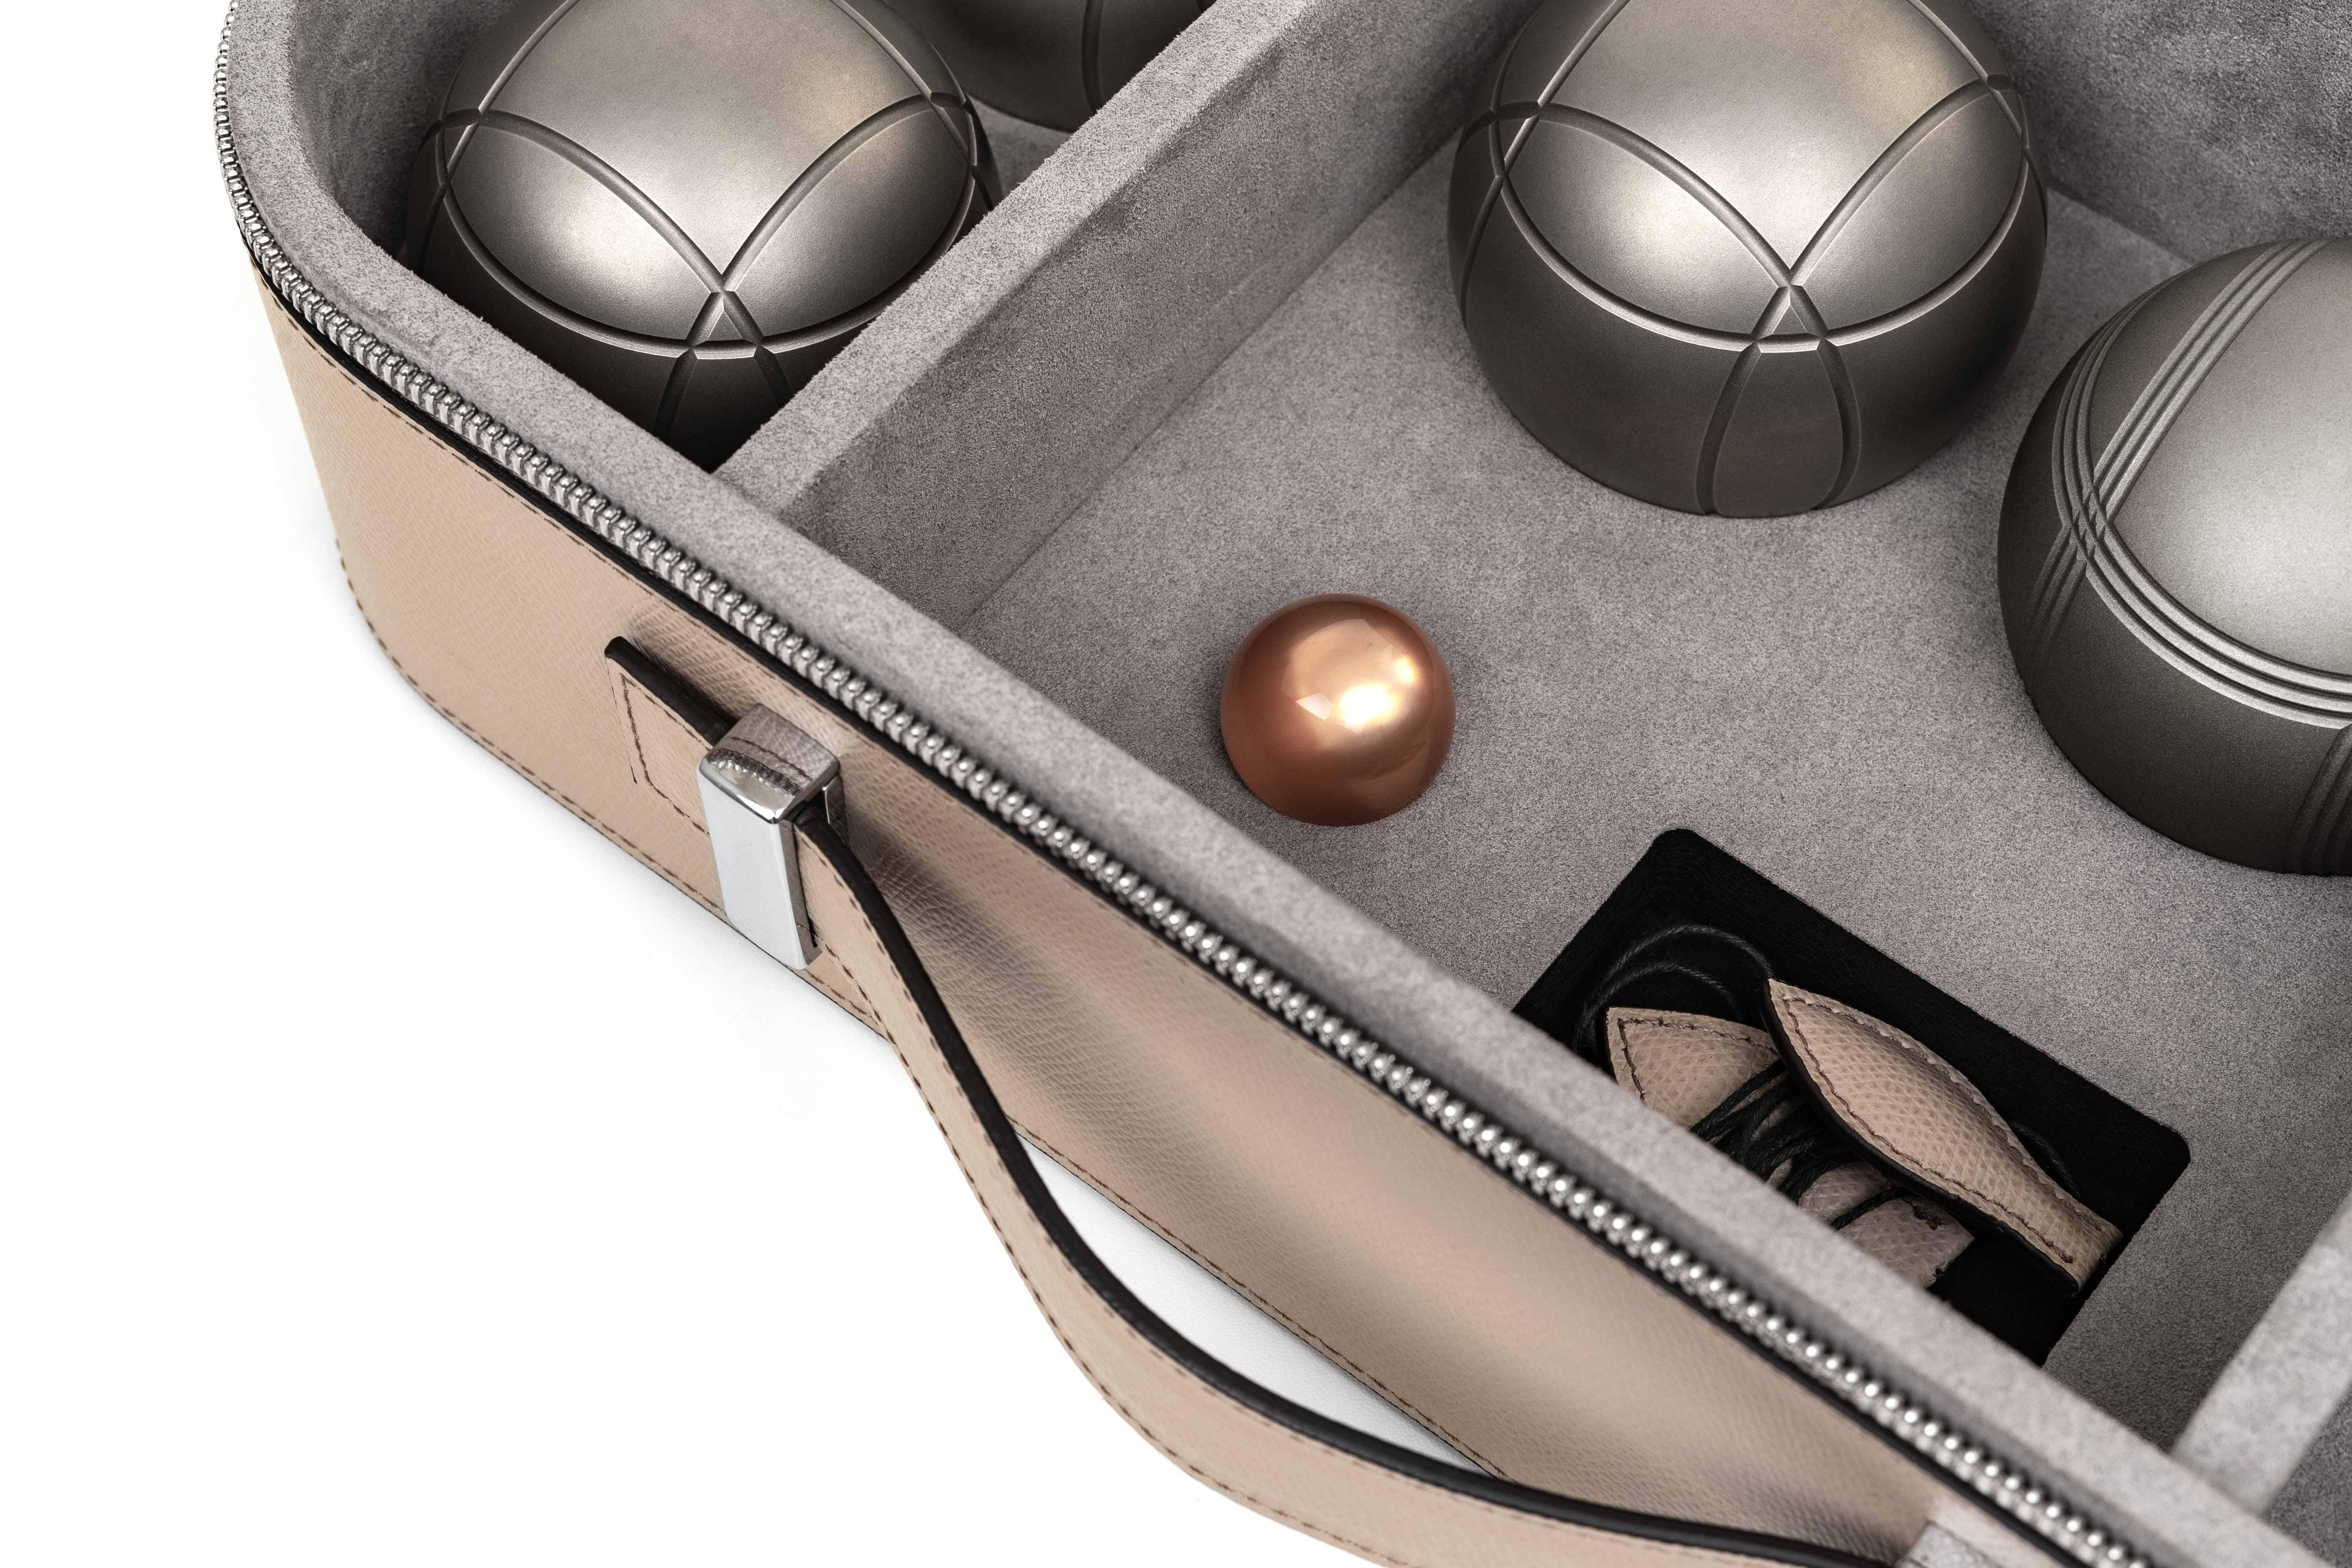 A complete game set of 6 metal balls with one jack and a leather measuring rope.

Our portable Pétanque game set comes with its own sleek storage box, completely covered with genuine grained leather. Ideal for outdoor entertaining or as a perfect